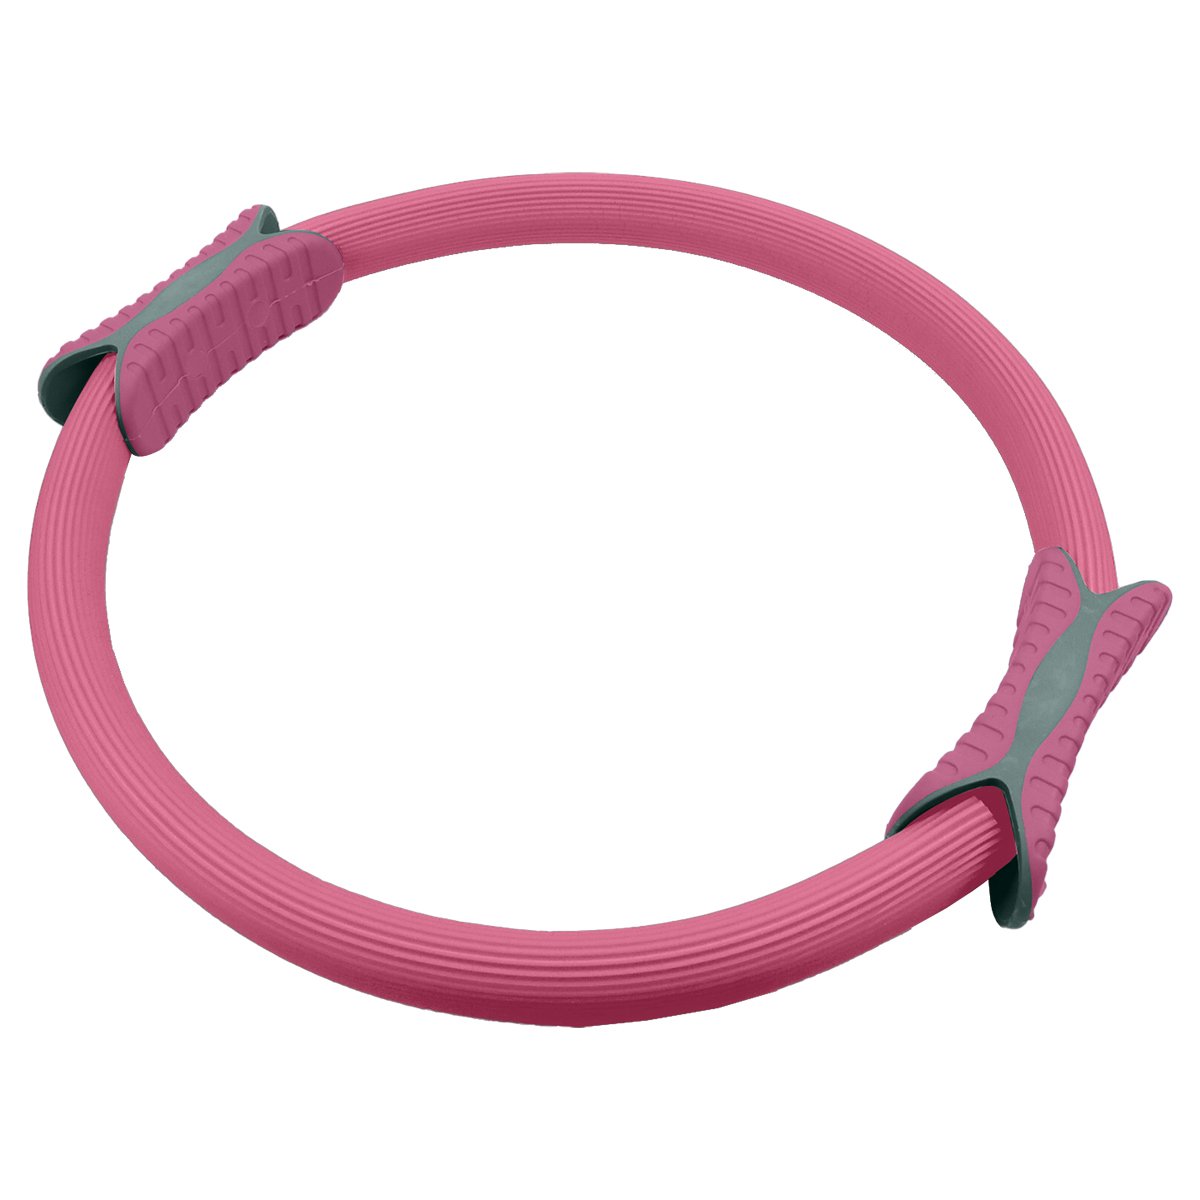 Powertrain Pilates Ring Band Yoga Home Workout Exercise Band Pink 2